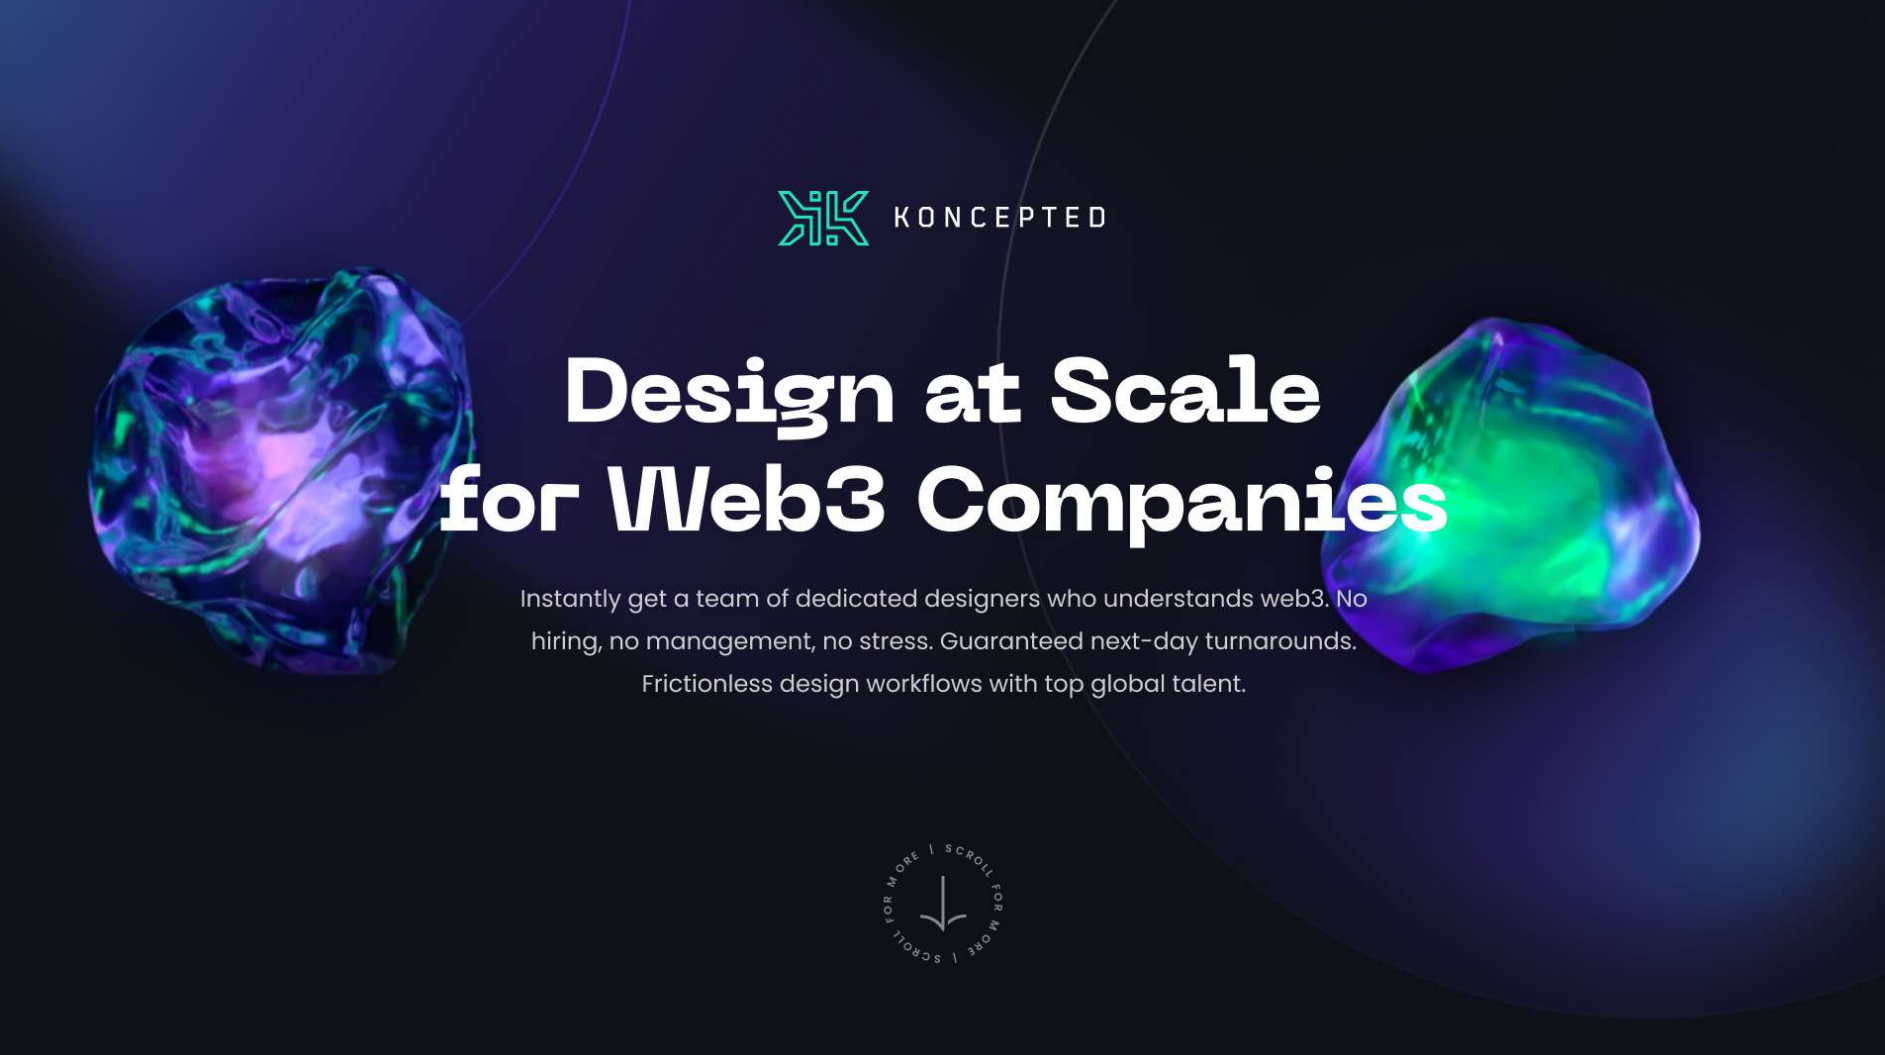 Koncepted - Design at Scale for Web3 Companies